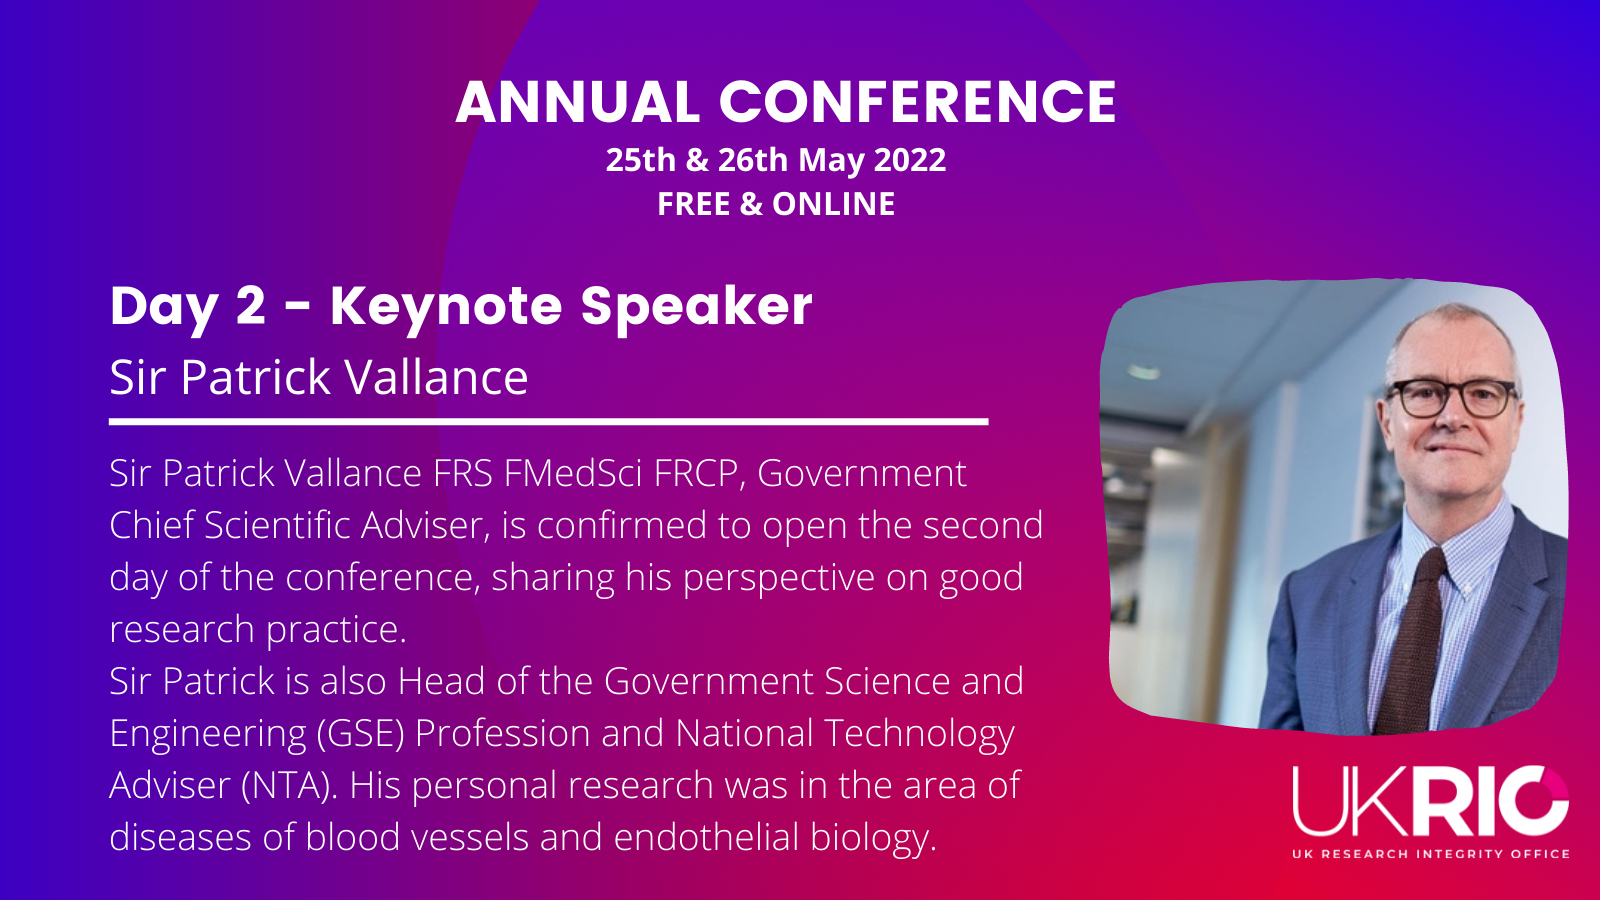 Sir Patrick Vallance to open 2nd day of Annual Conference!